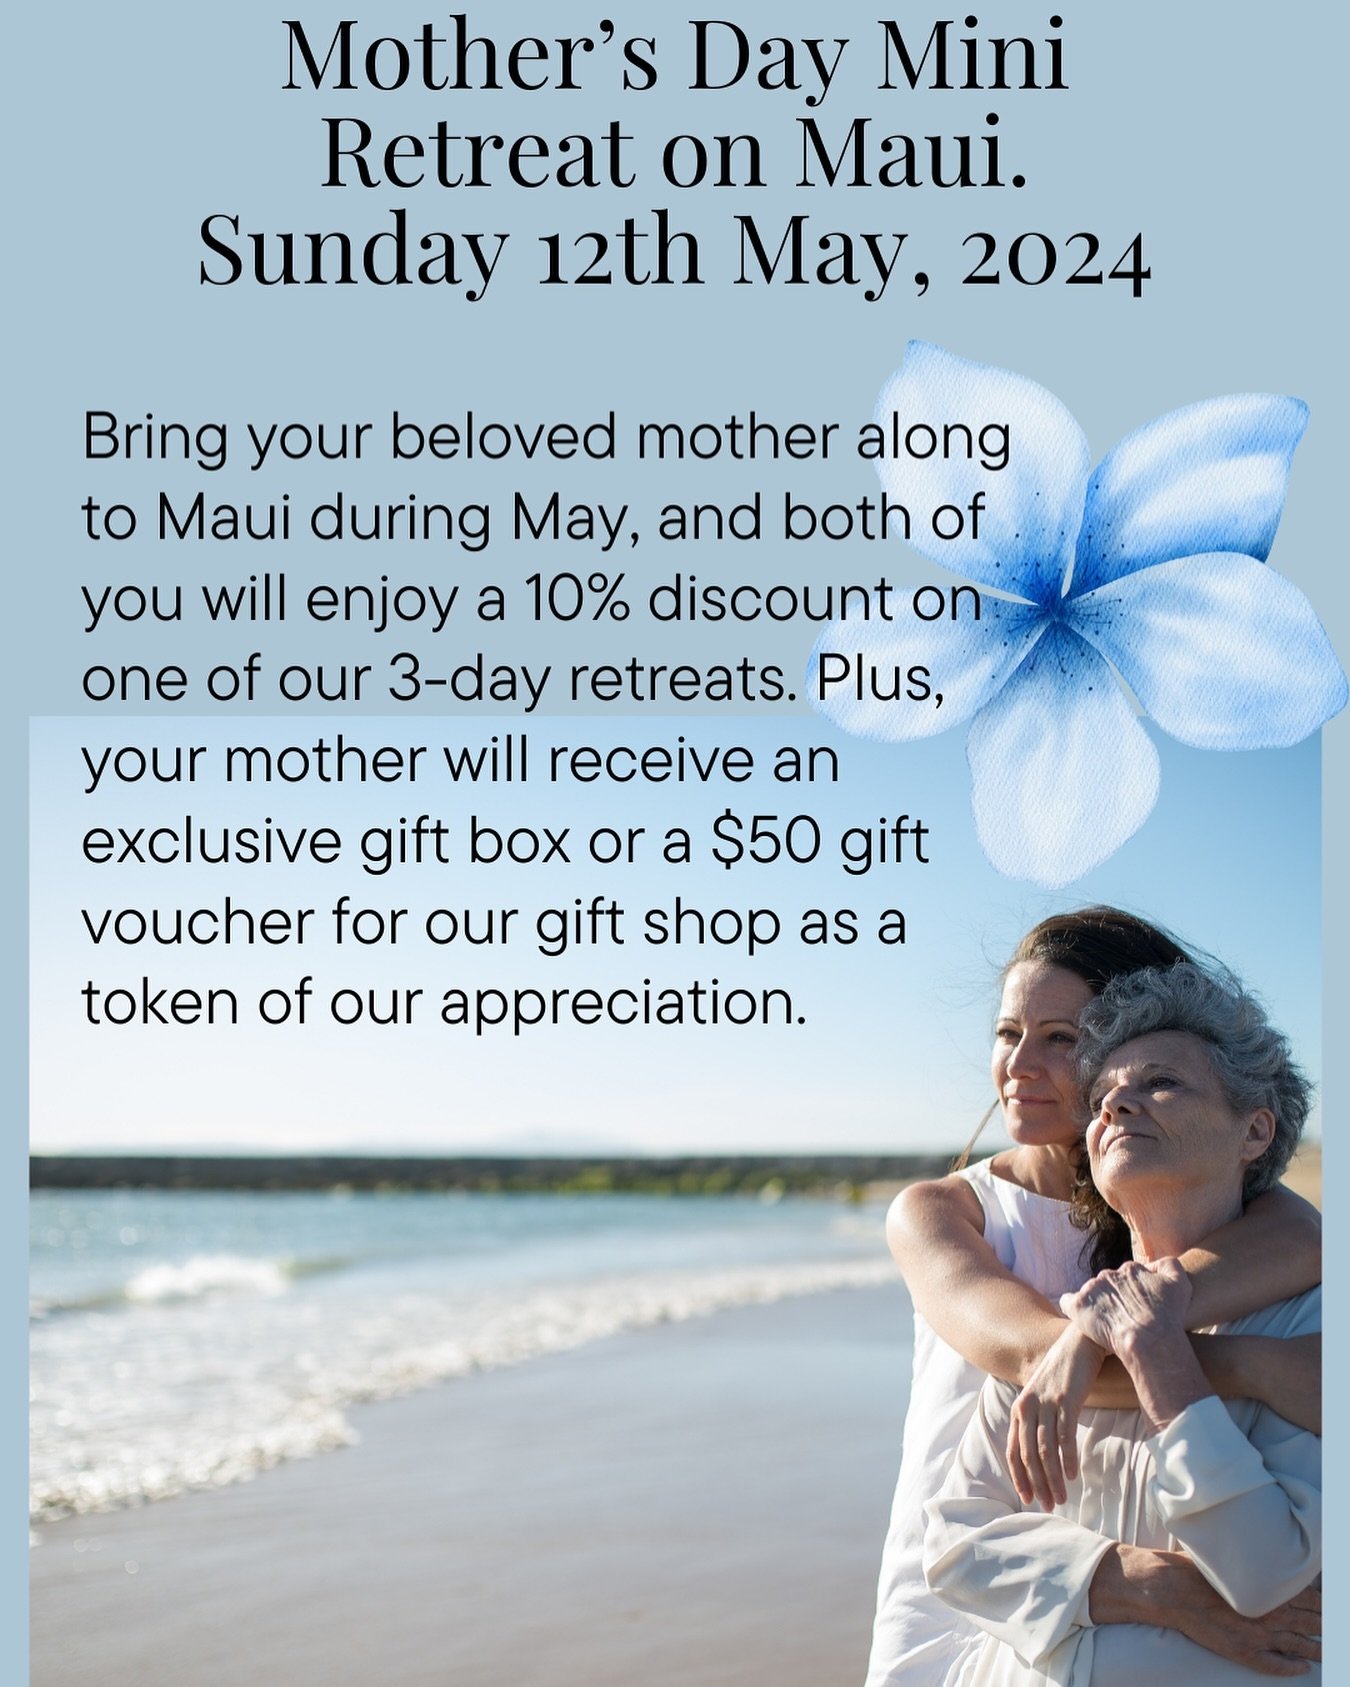 Mother&rsquo;s Day Mini Retreat. Sunday 12th May, 2024🤍

Embark on an enchanting journey with our Mother&rsquo;s Day Mini retreat, designed to pamper and revitalize both body and spirit. Indulge in:

Two 45-minute sessions:, including an energy bala